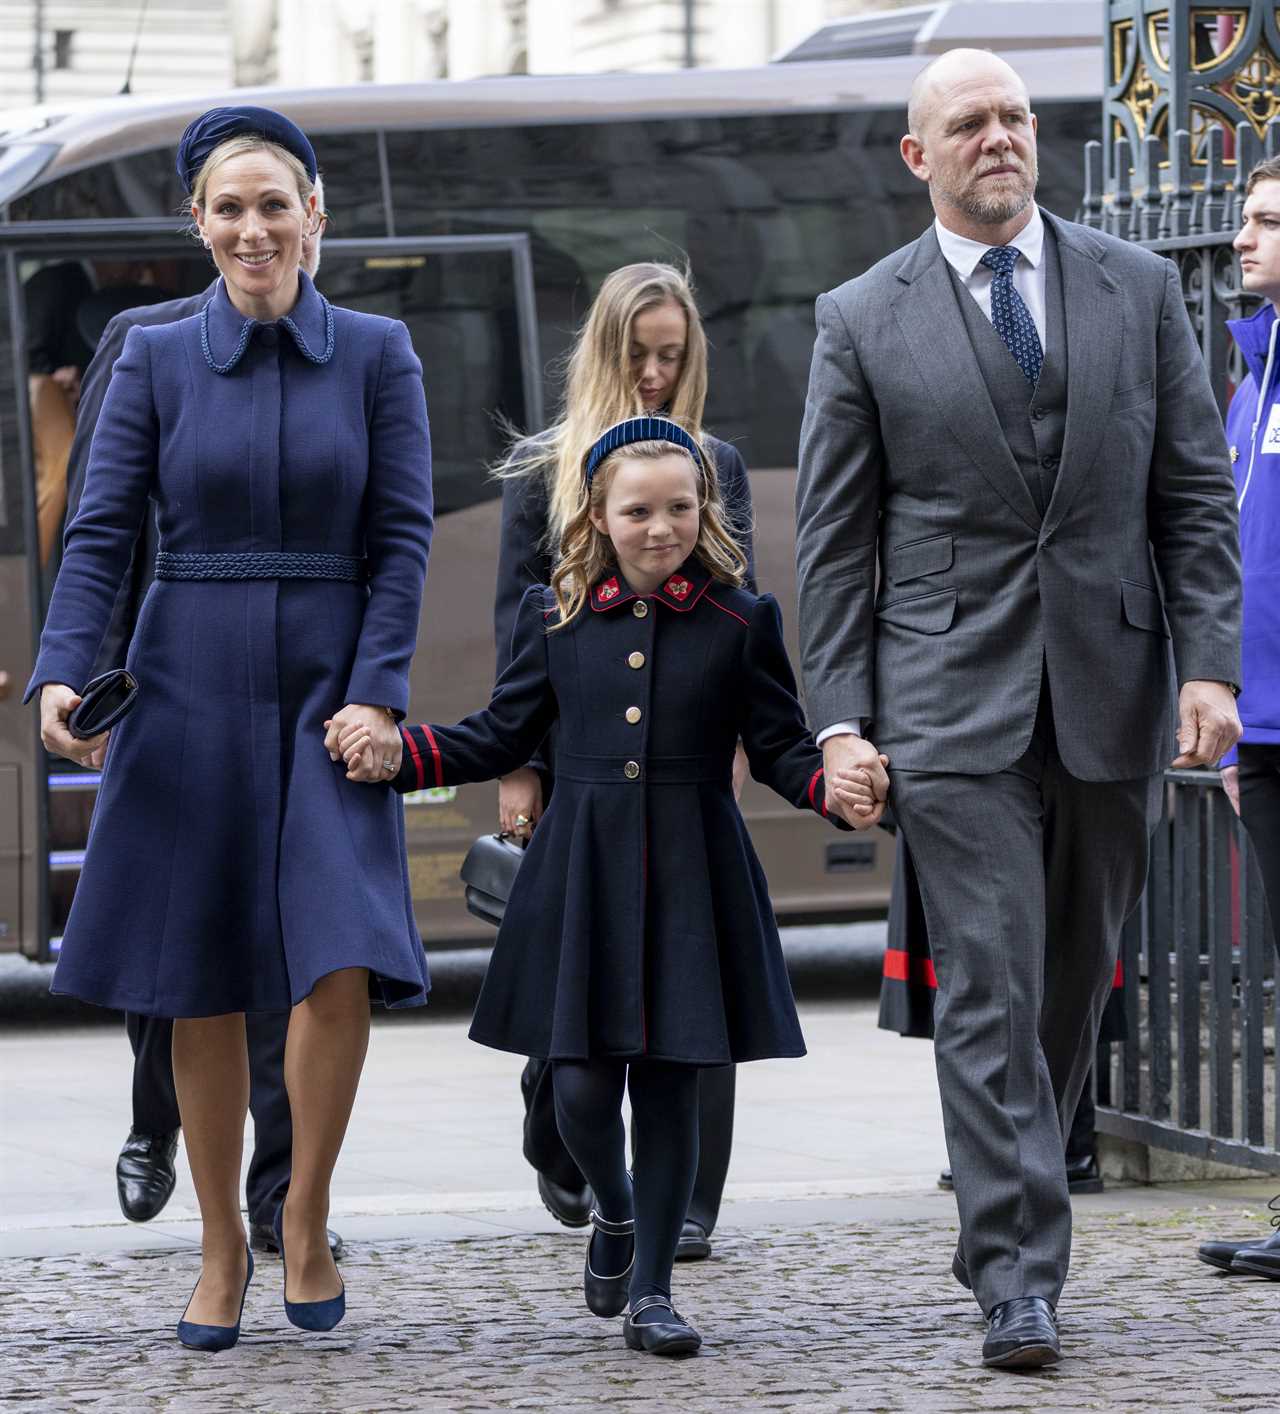 Mike Tindall gives insight into his royal life as he shares sweet story about daughter Mia